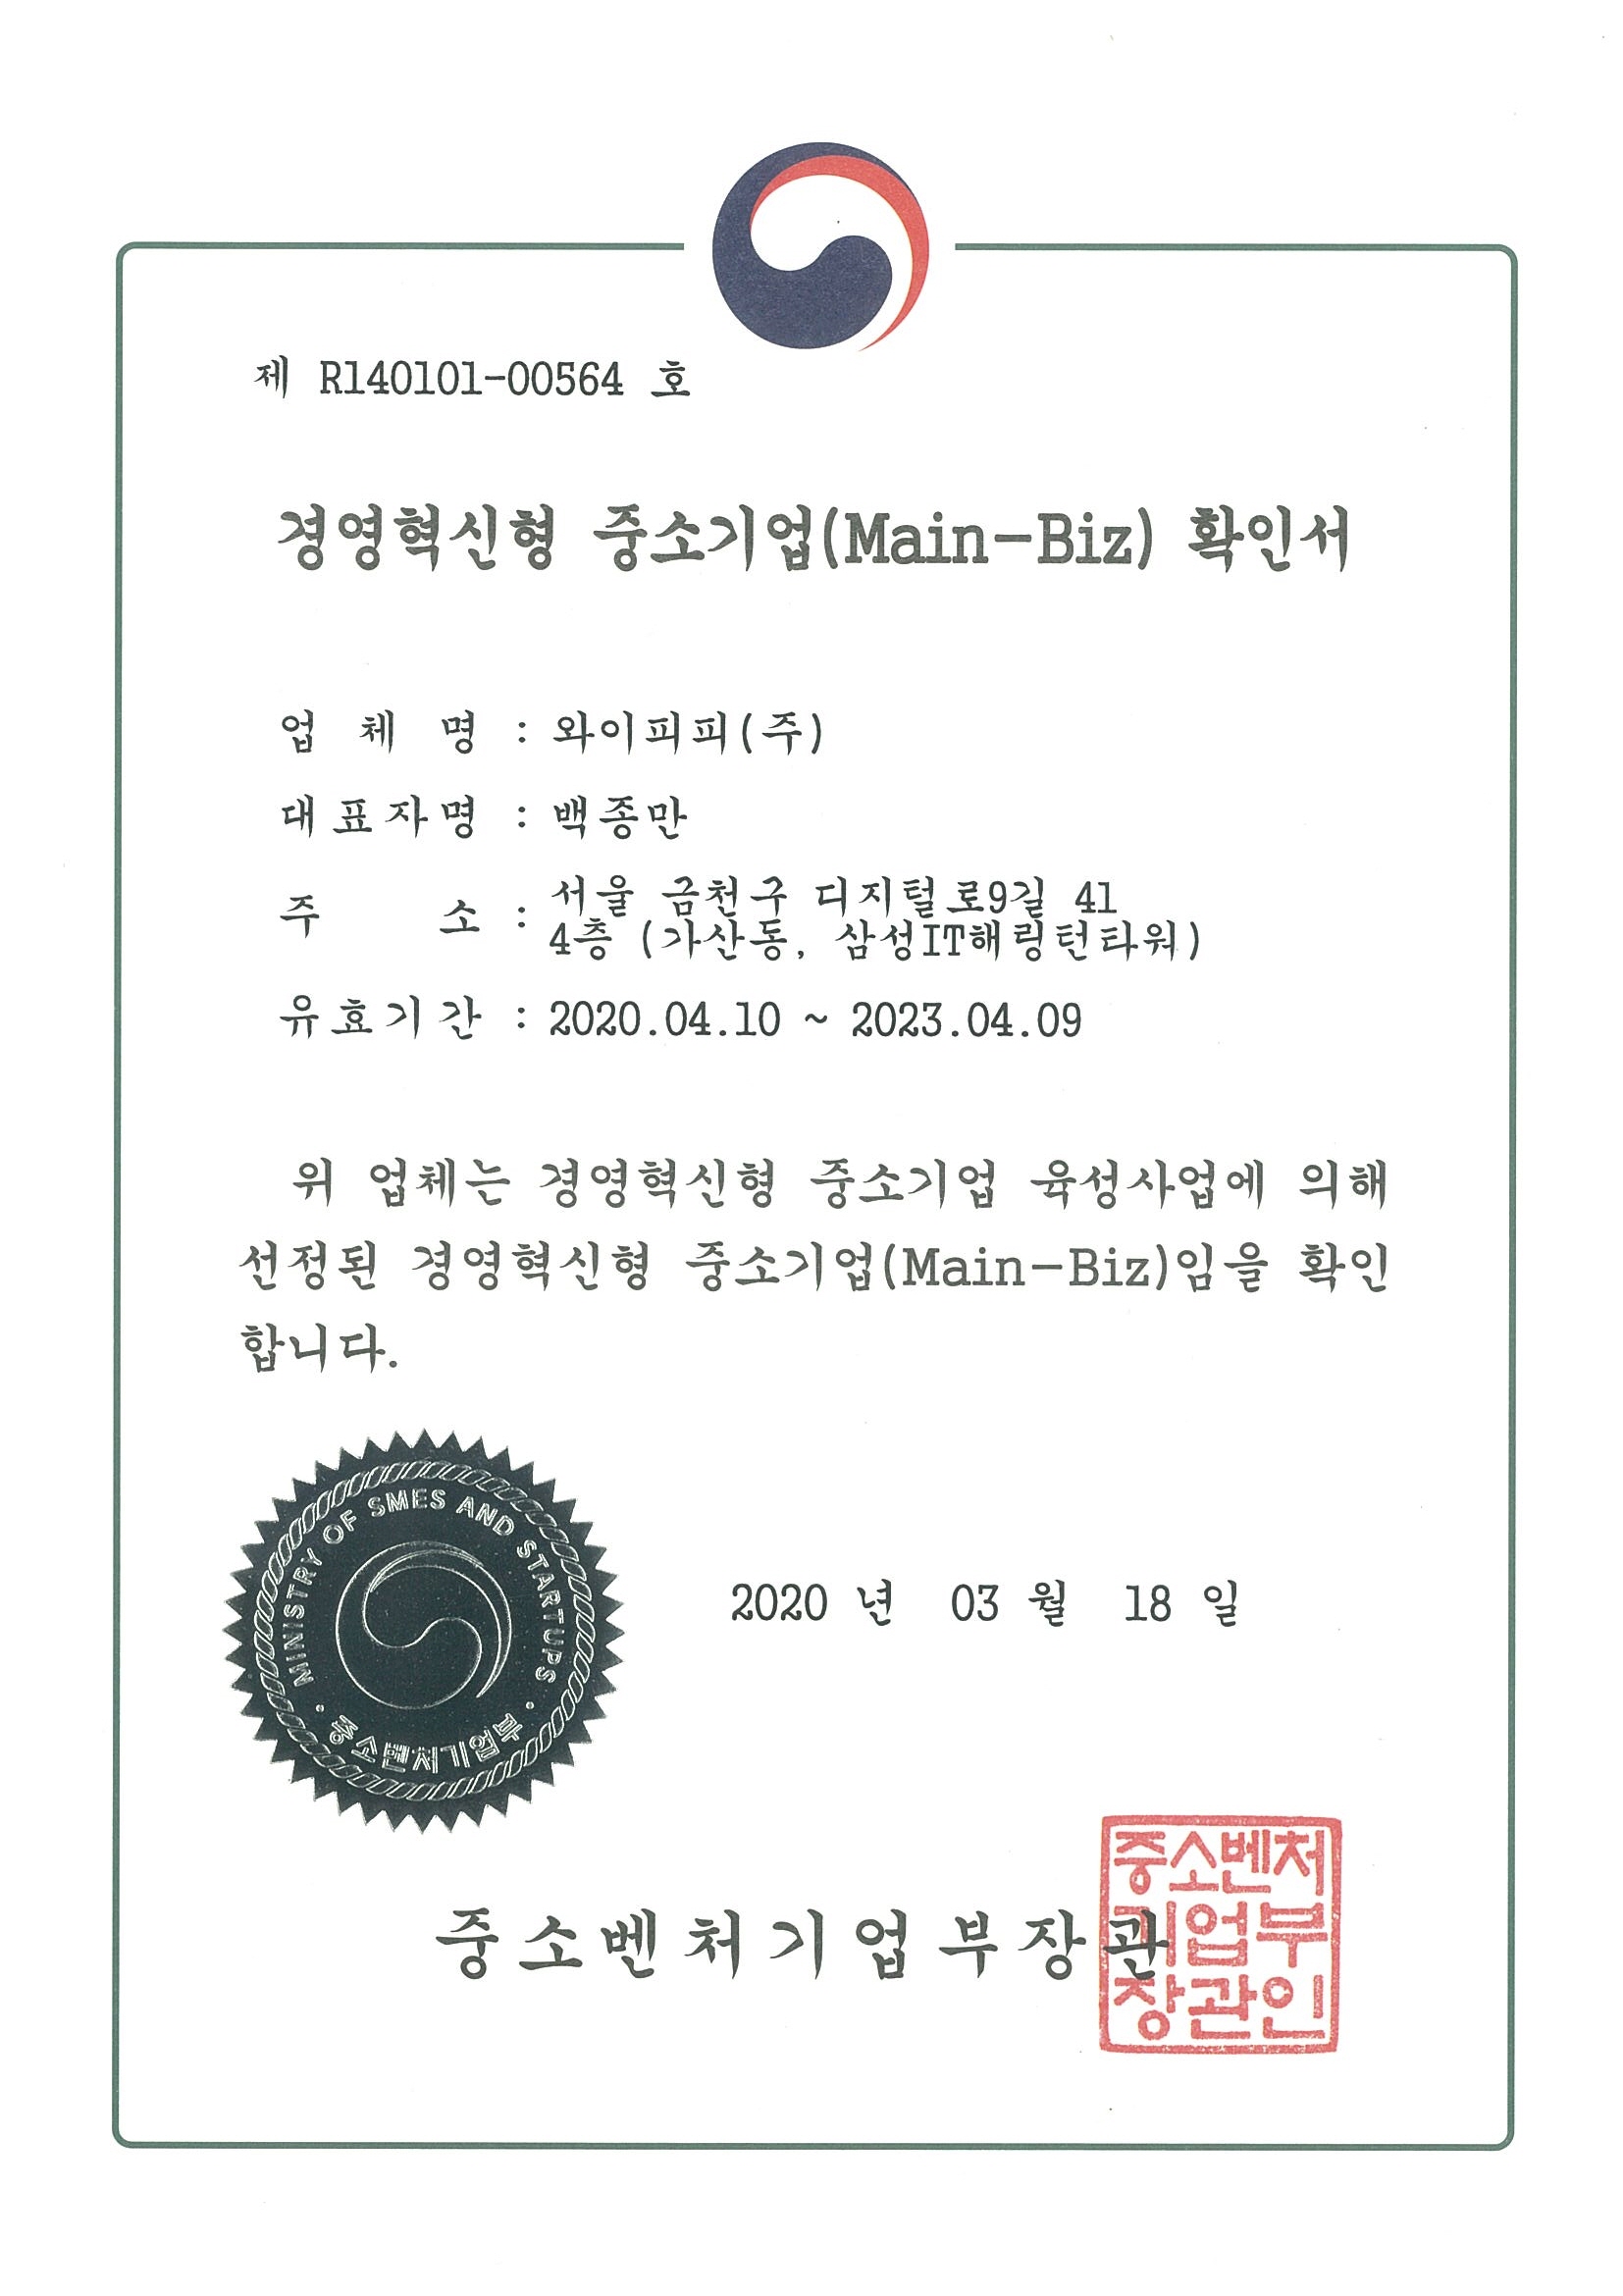 Certificate of Main-Biz (Ministry of SMEs and Startups)_2020.03.18.jpg